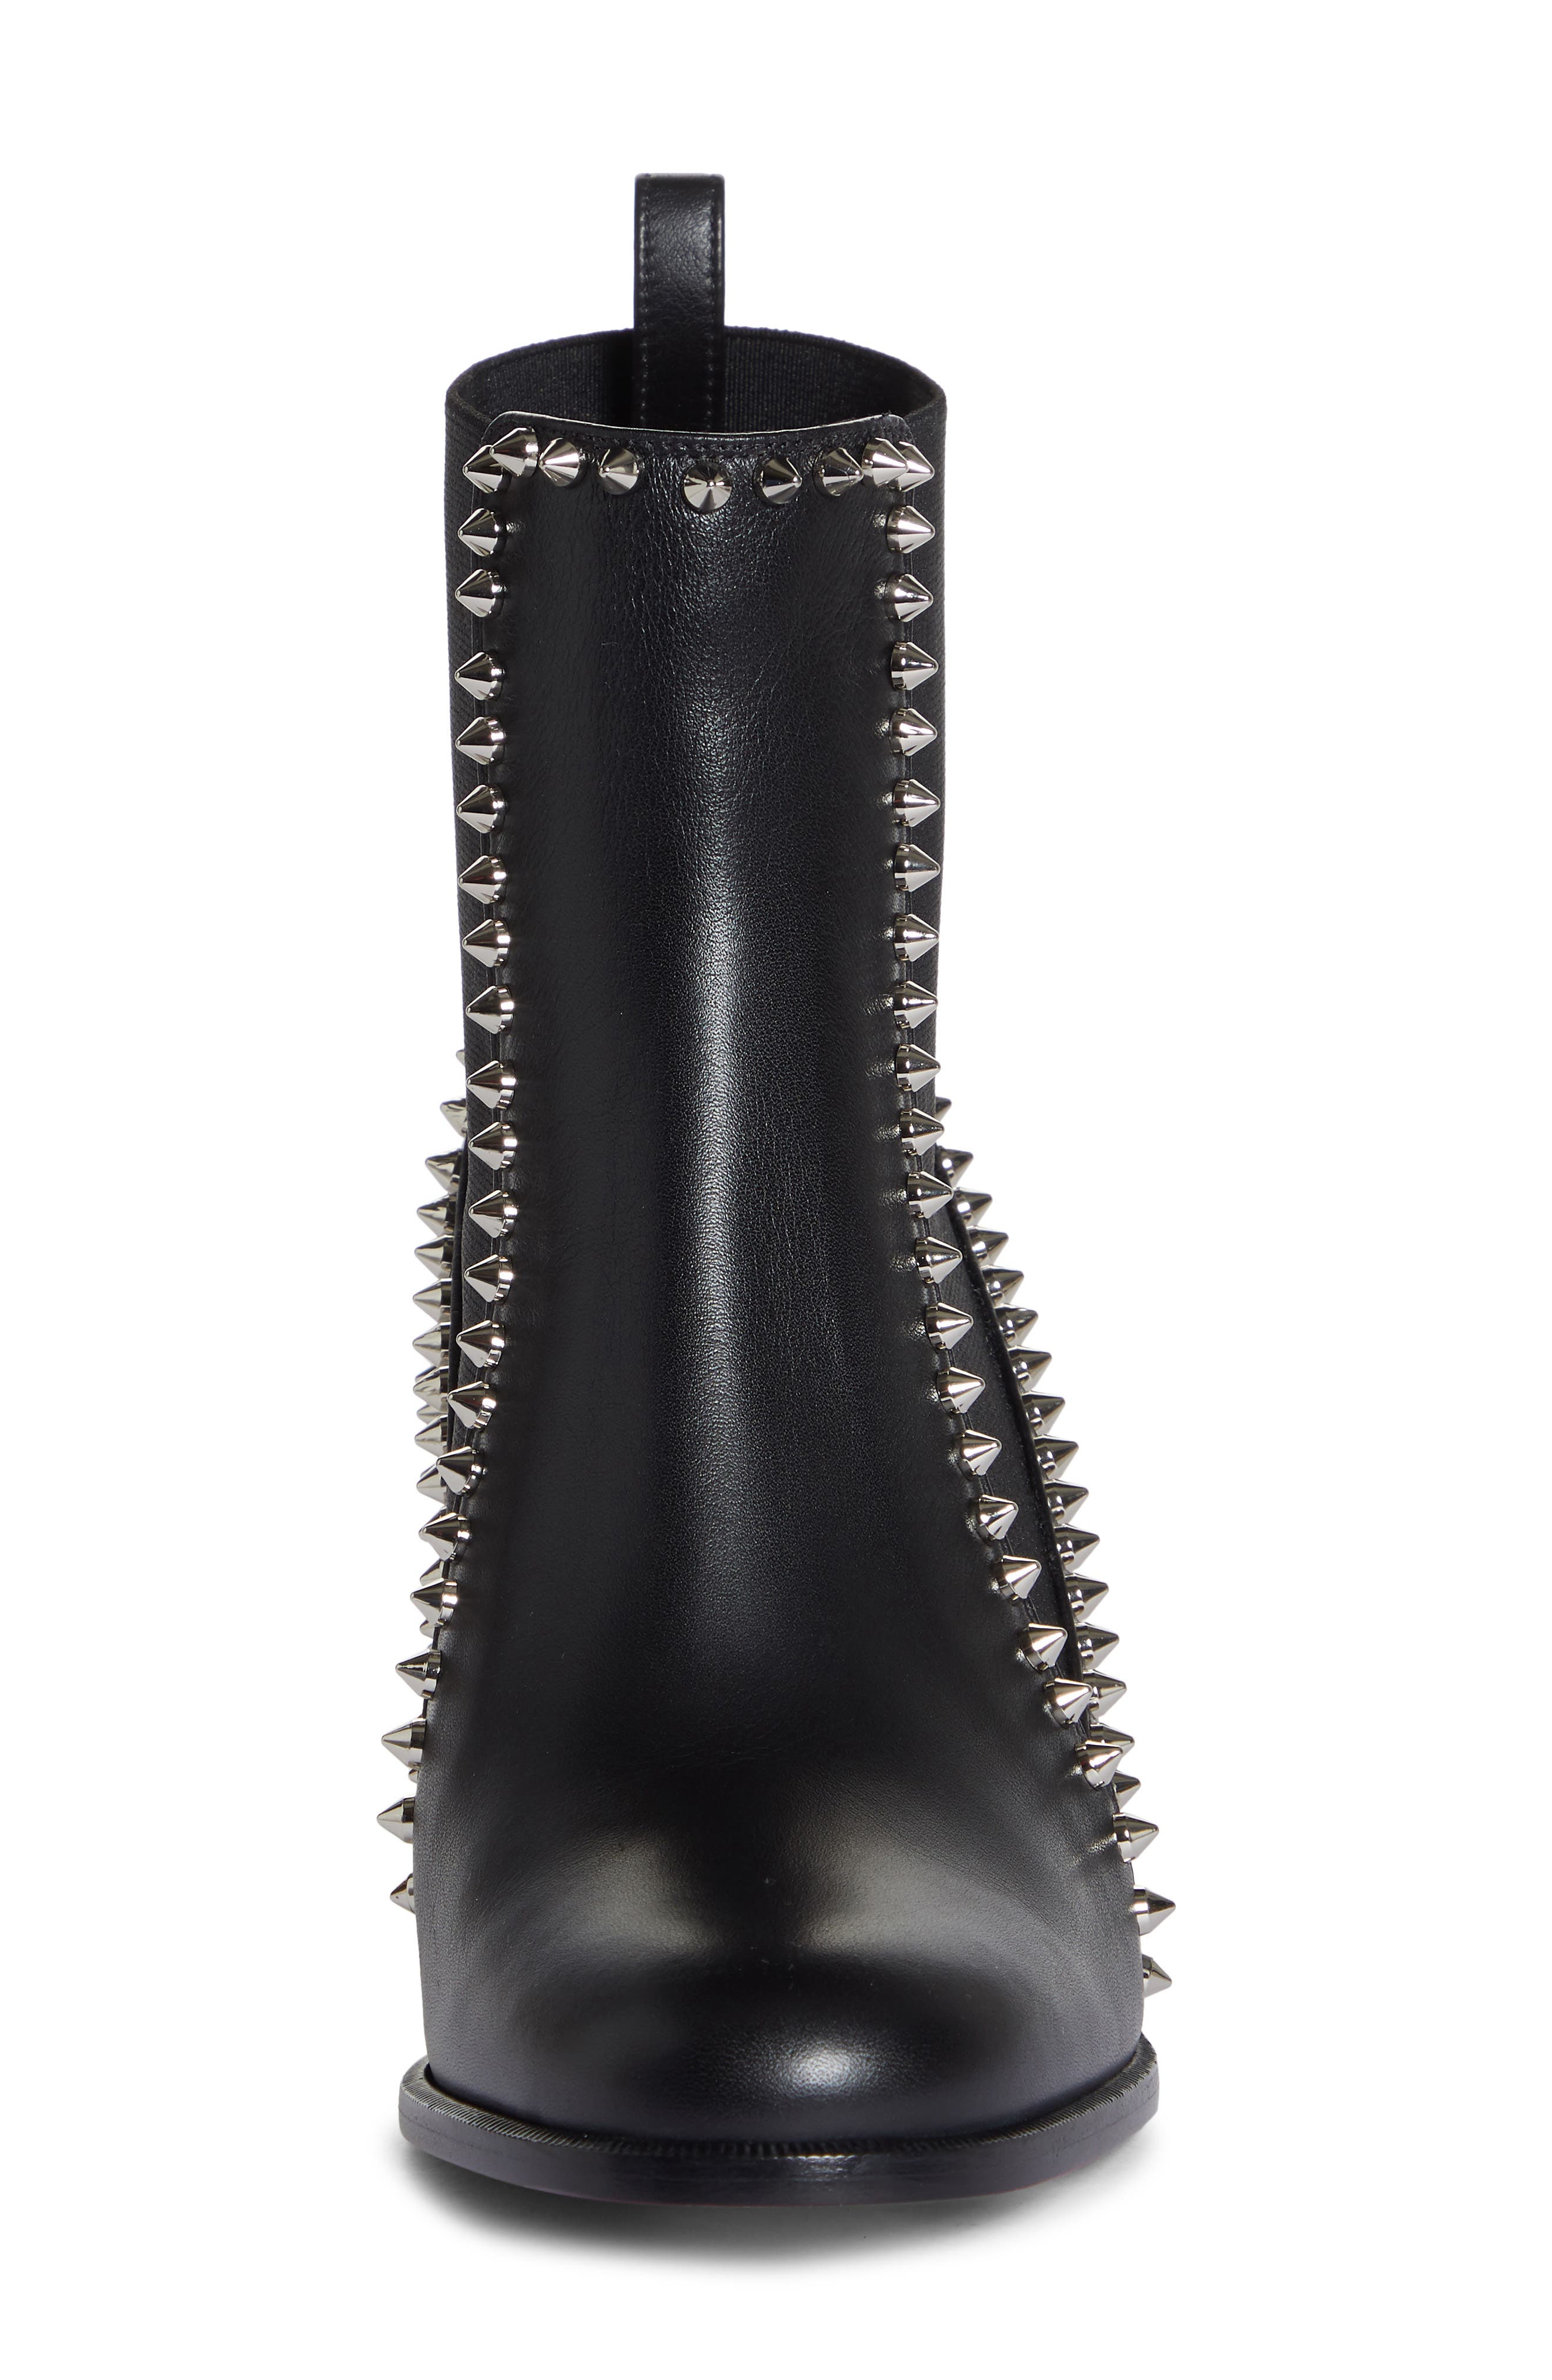 Christian Louboutin Willetta Studded Booties in Black